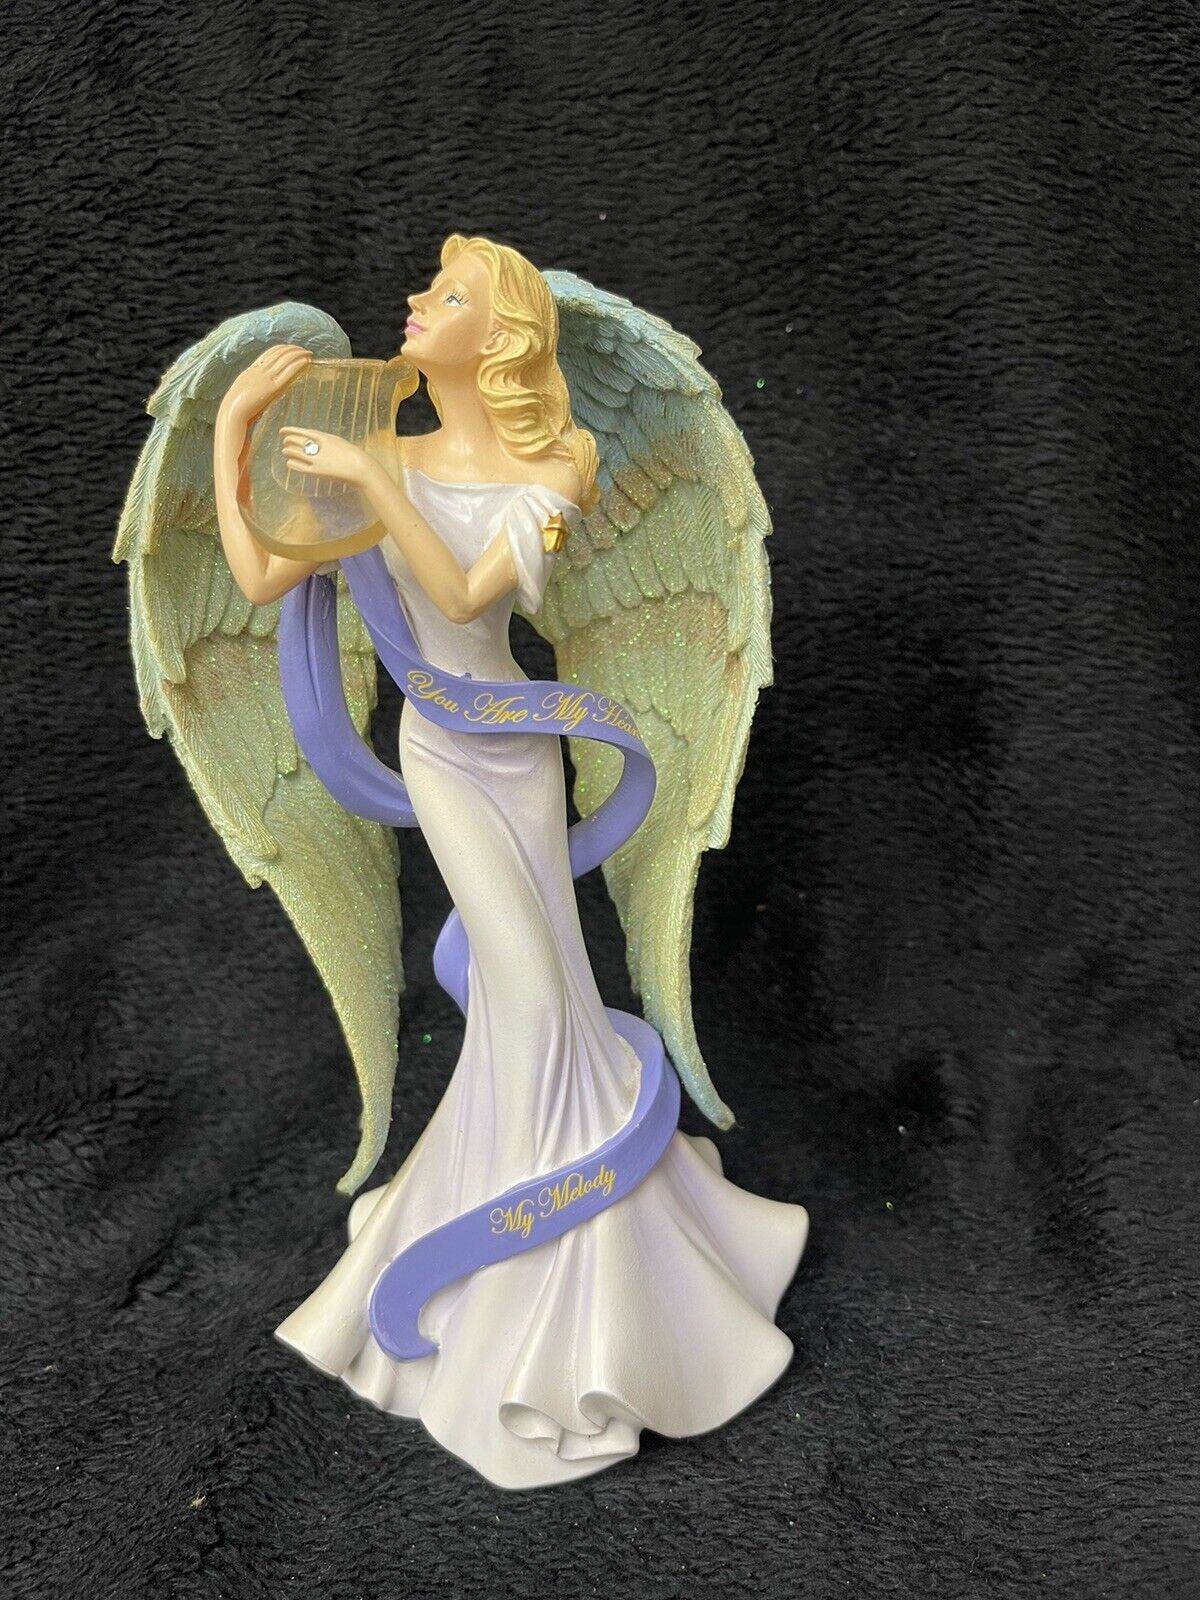 Thomas Kinkade Reflections Of My Soul Collection Angel - 2014 